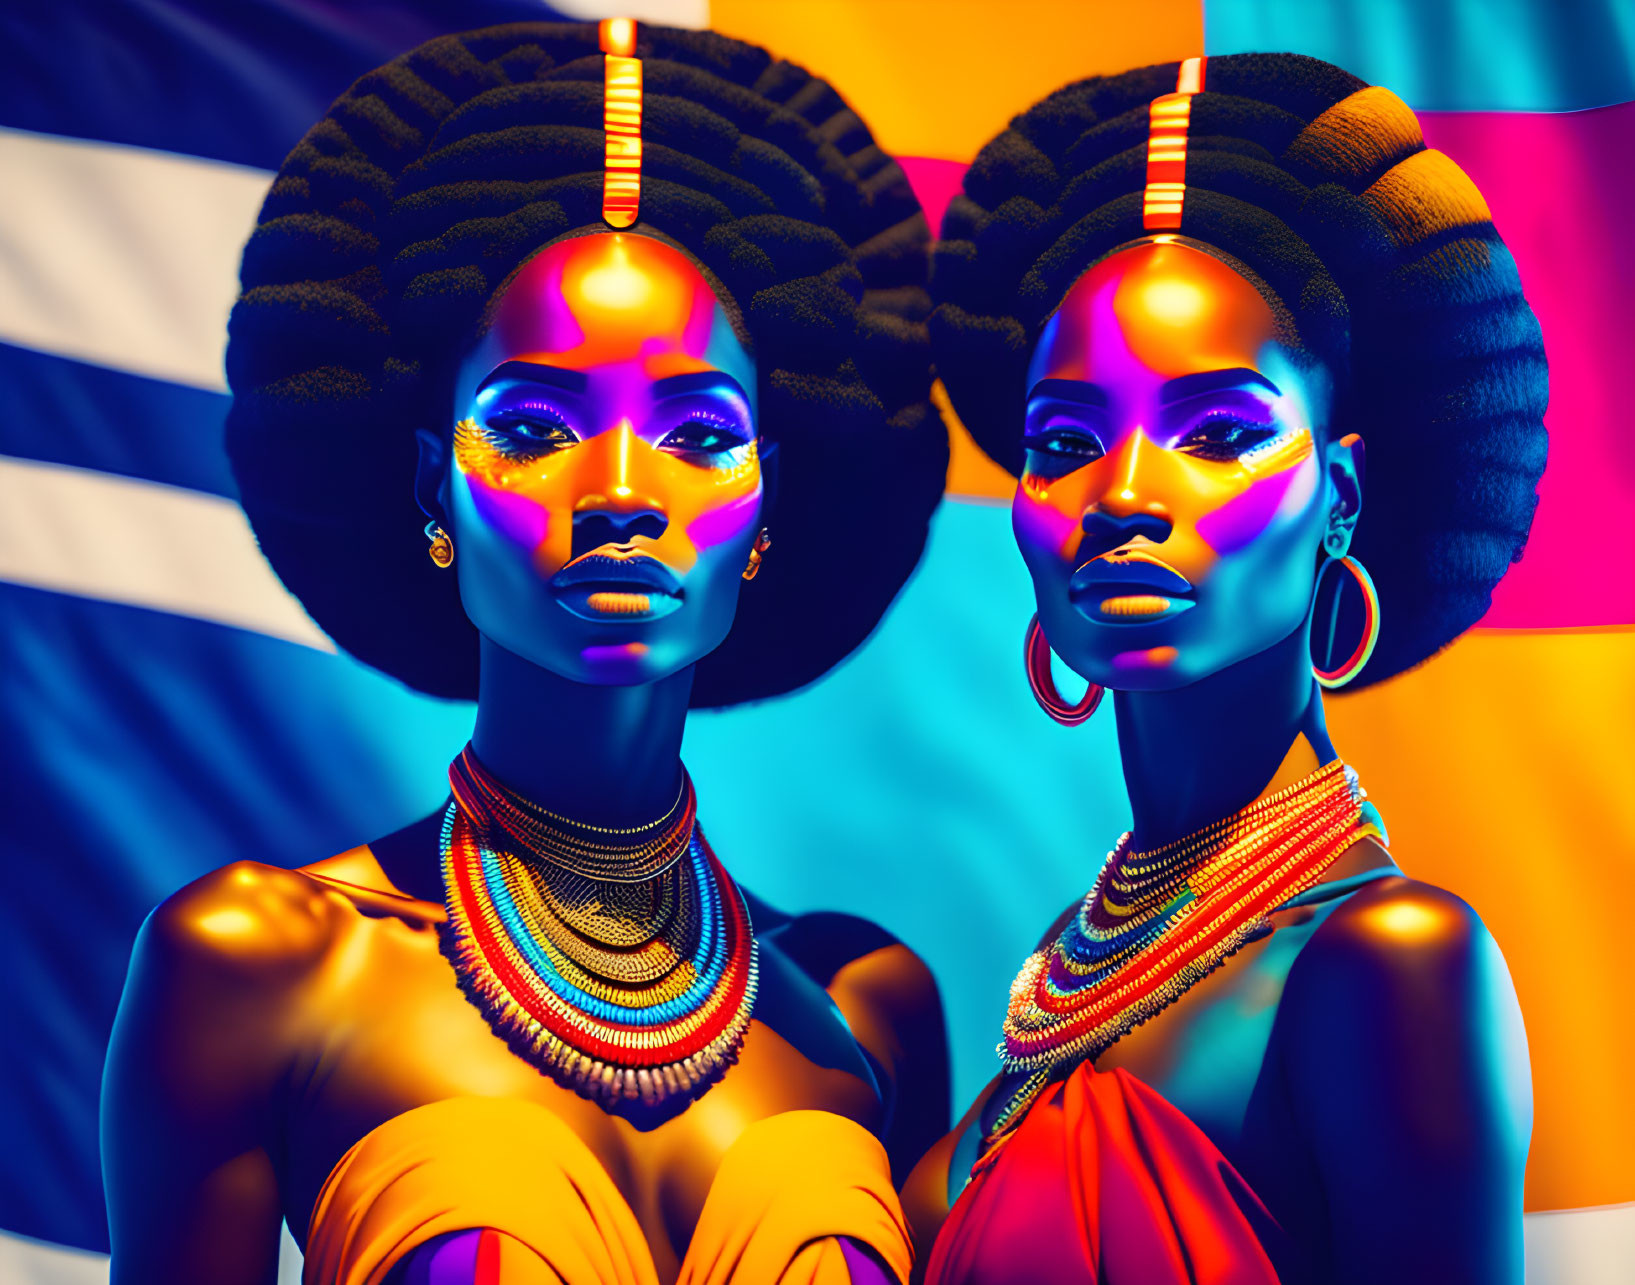 Two women with vibrant makeup and elaborate hairstyles against a colorful striped background.